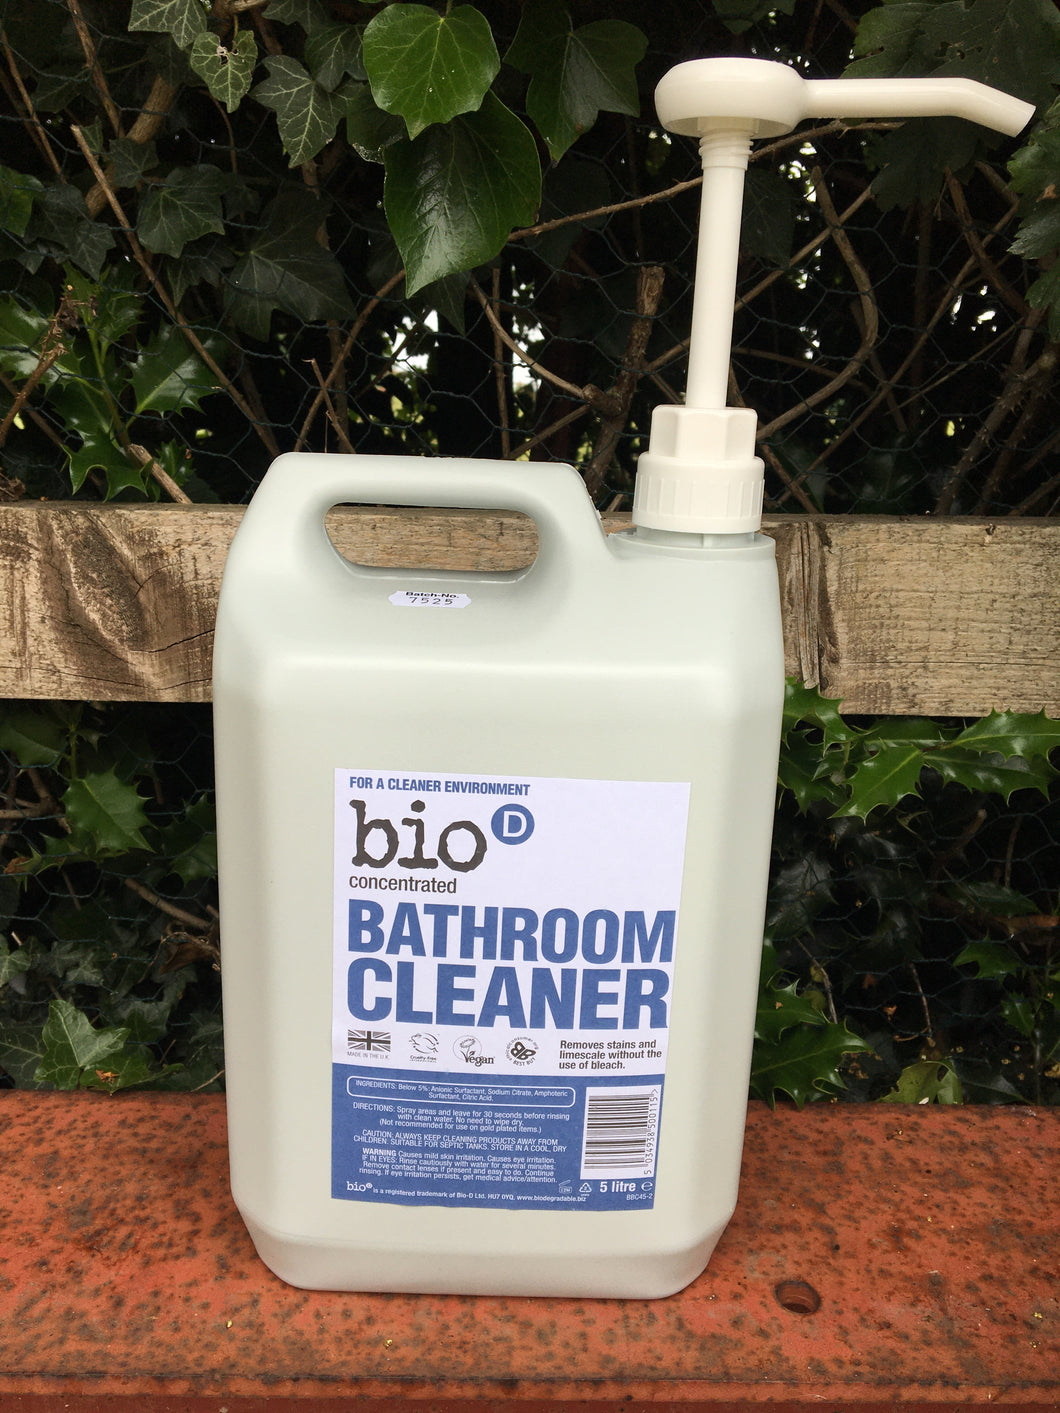 Bio D Bathroom Cleaner Refill only